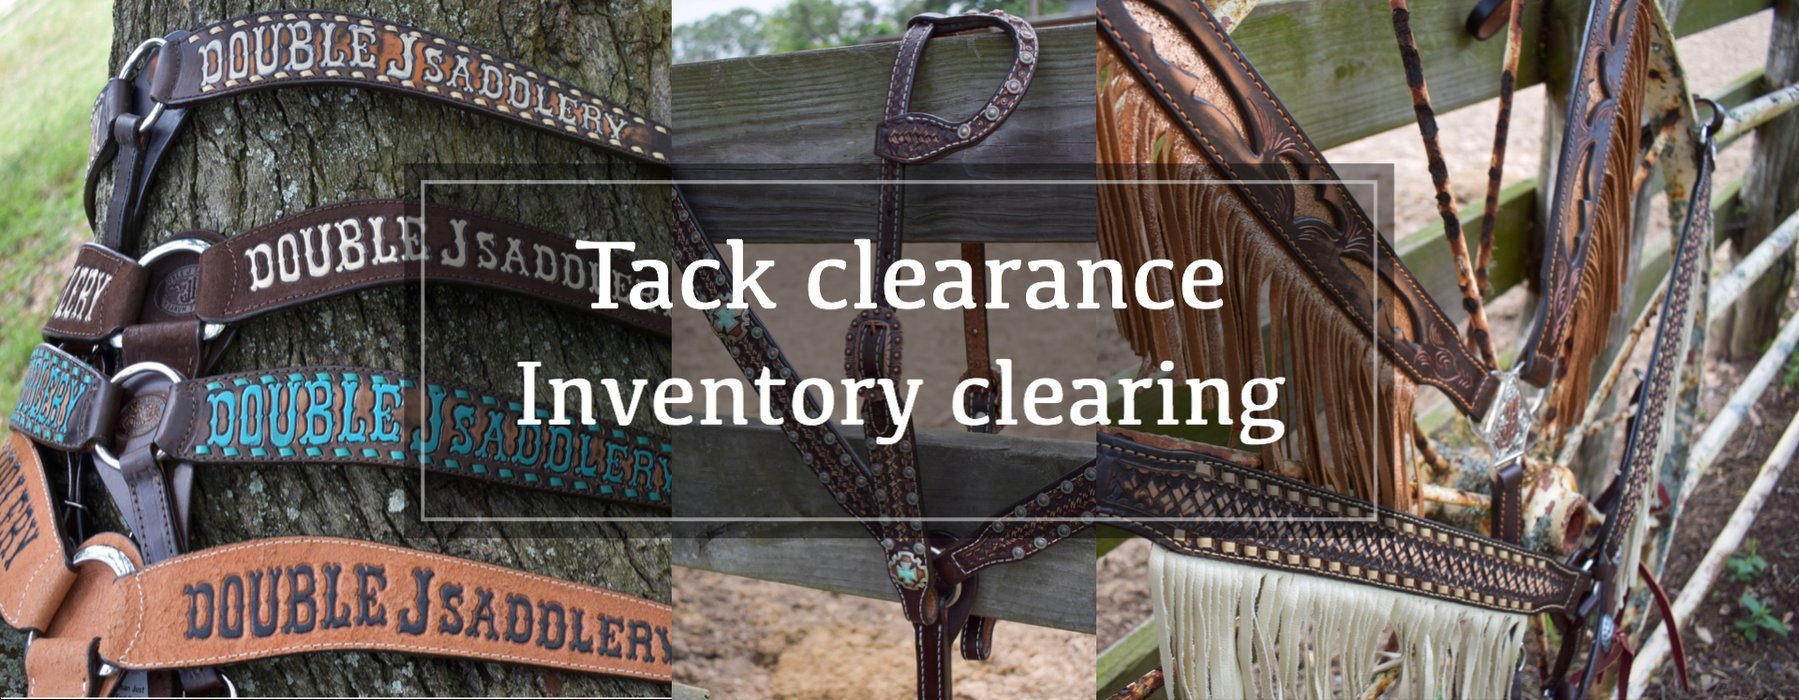 Handmade Leather Saddles, Tack, Belts, Bags, and more – Double J Saddlery